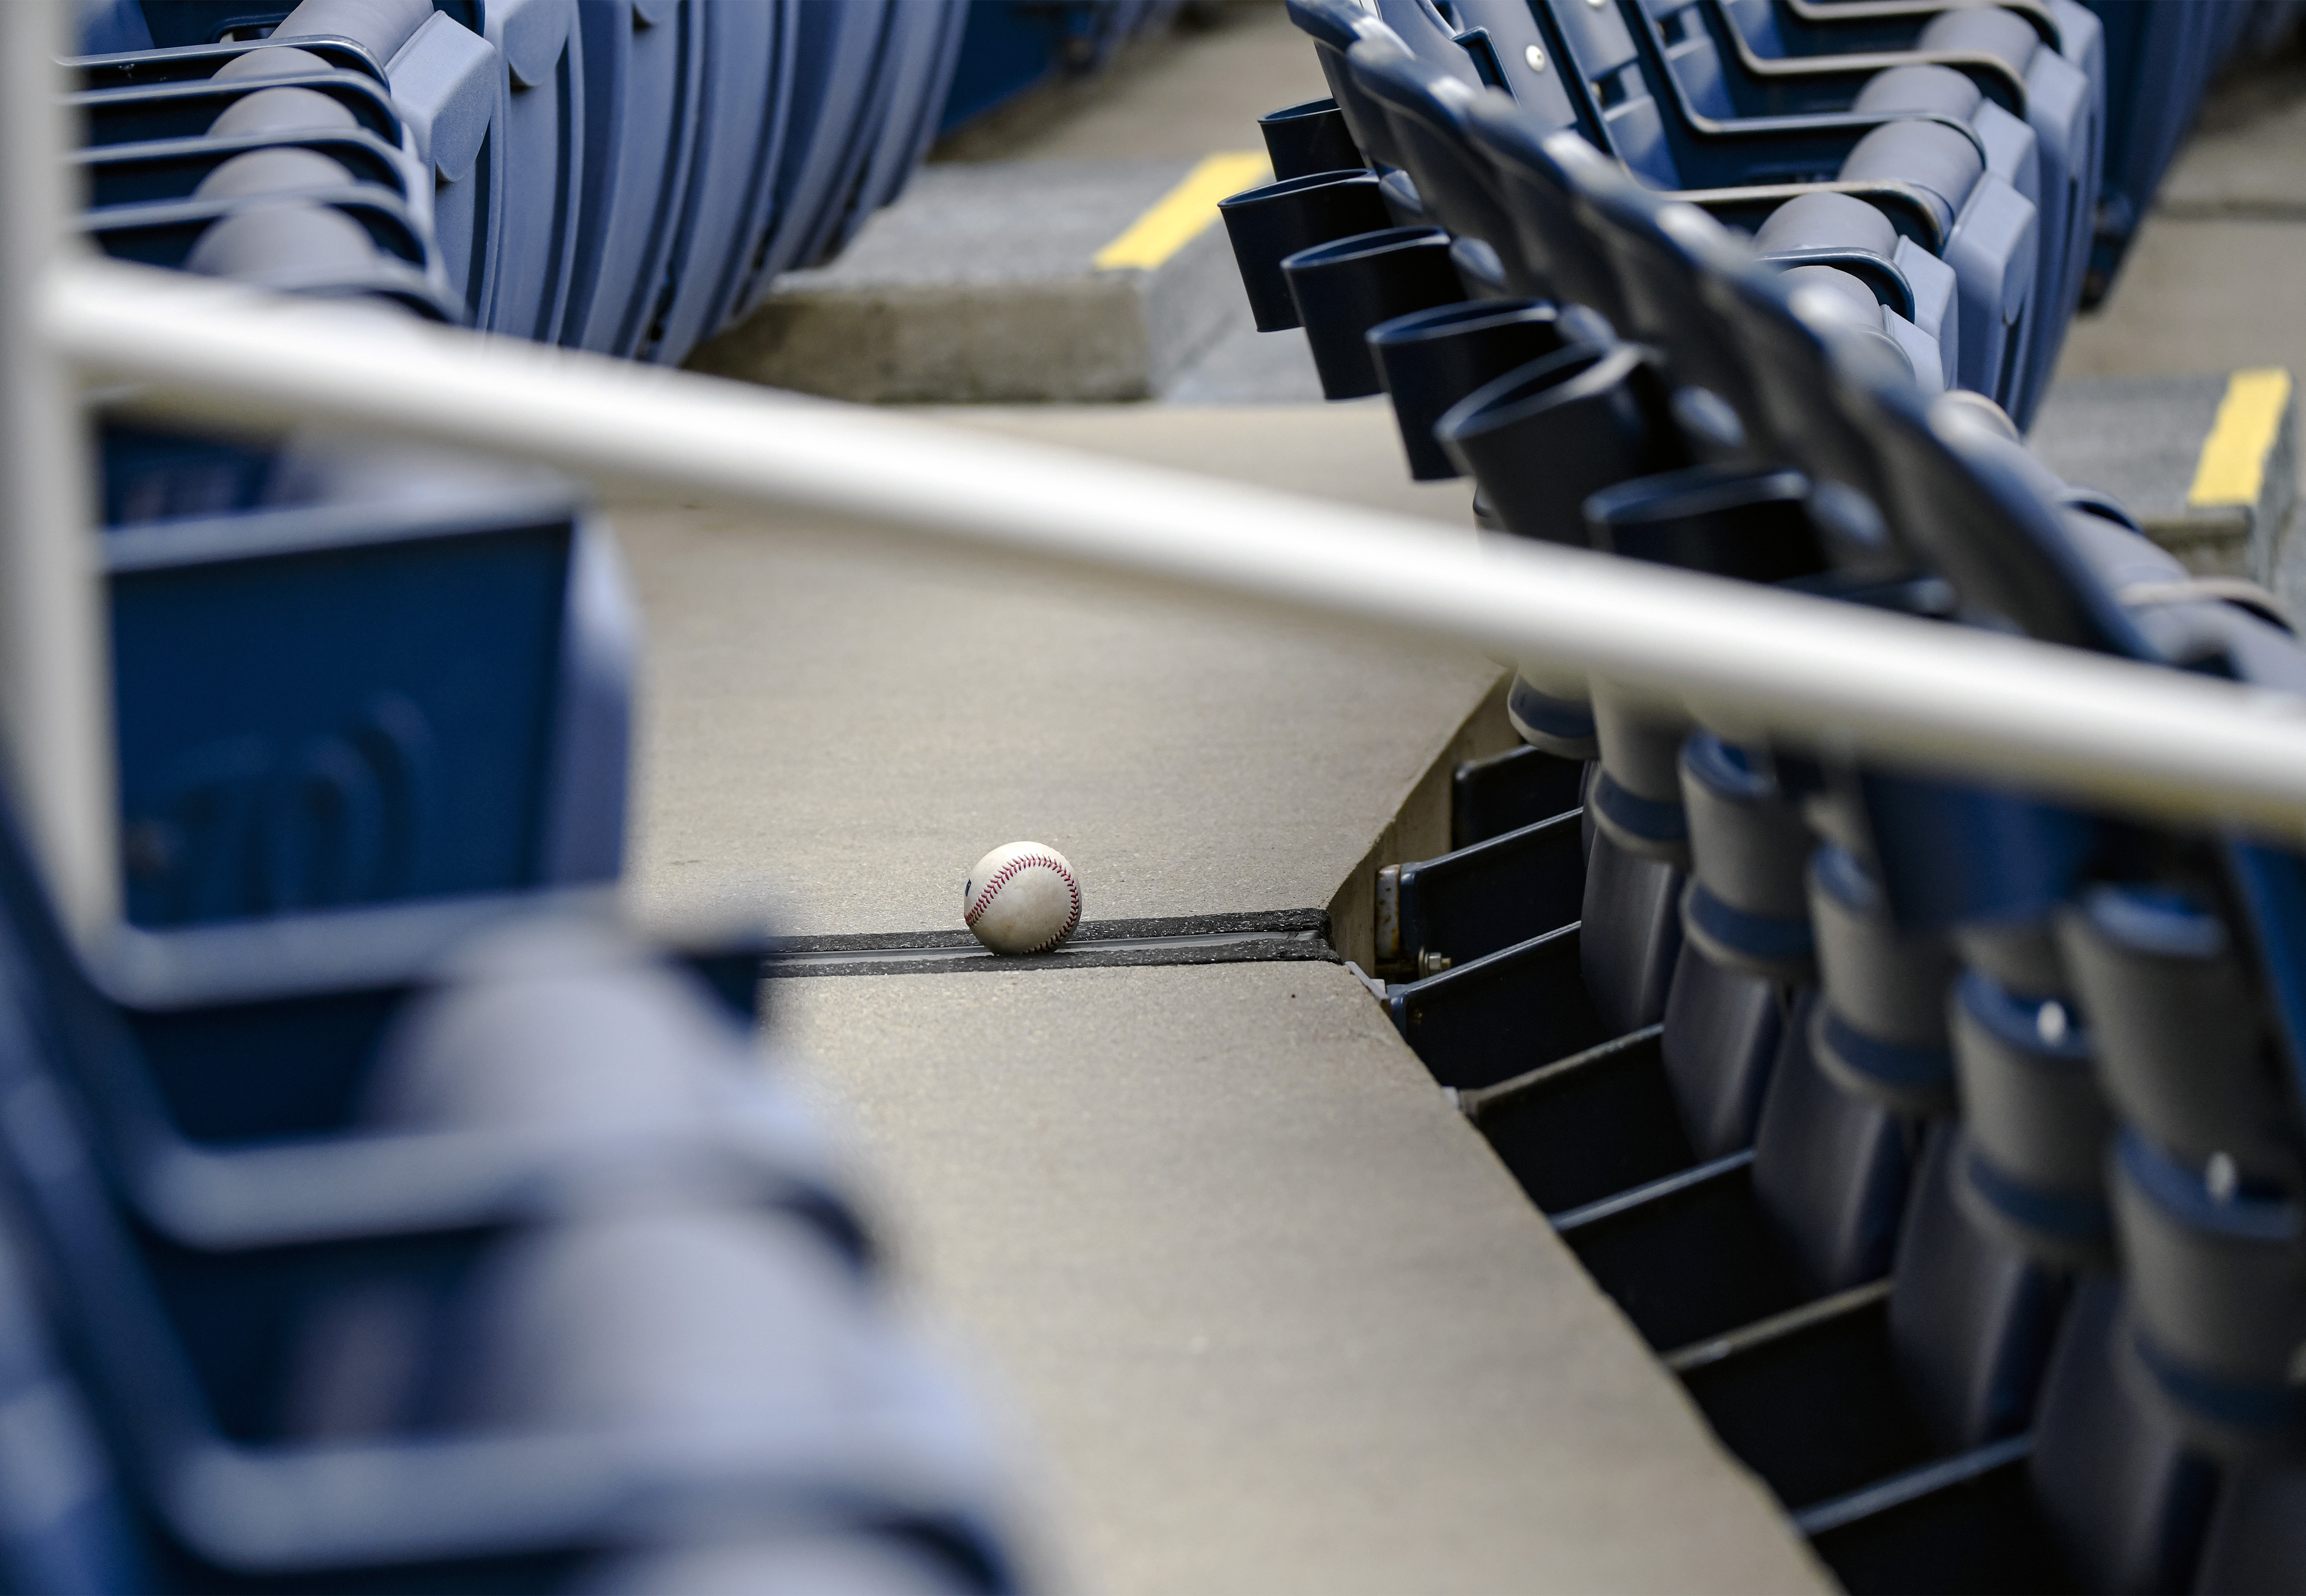 Foul balls and home run balls are not a thing in 2020